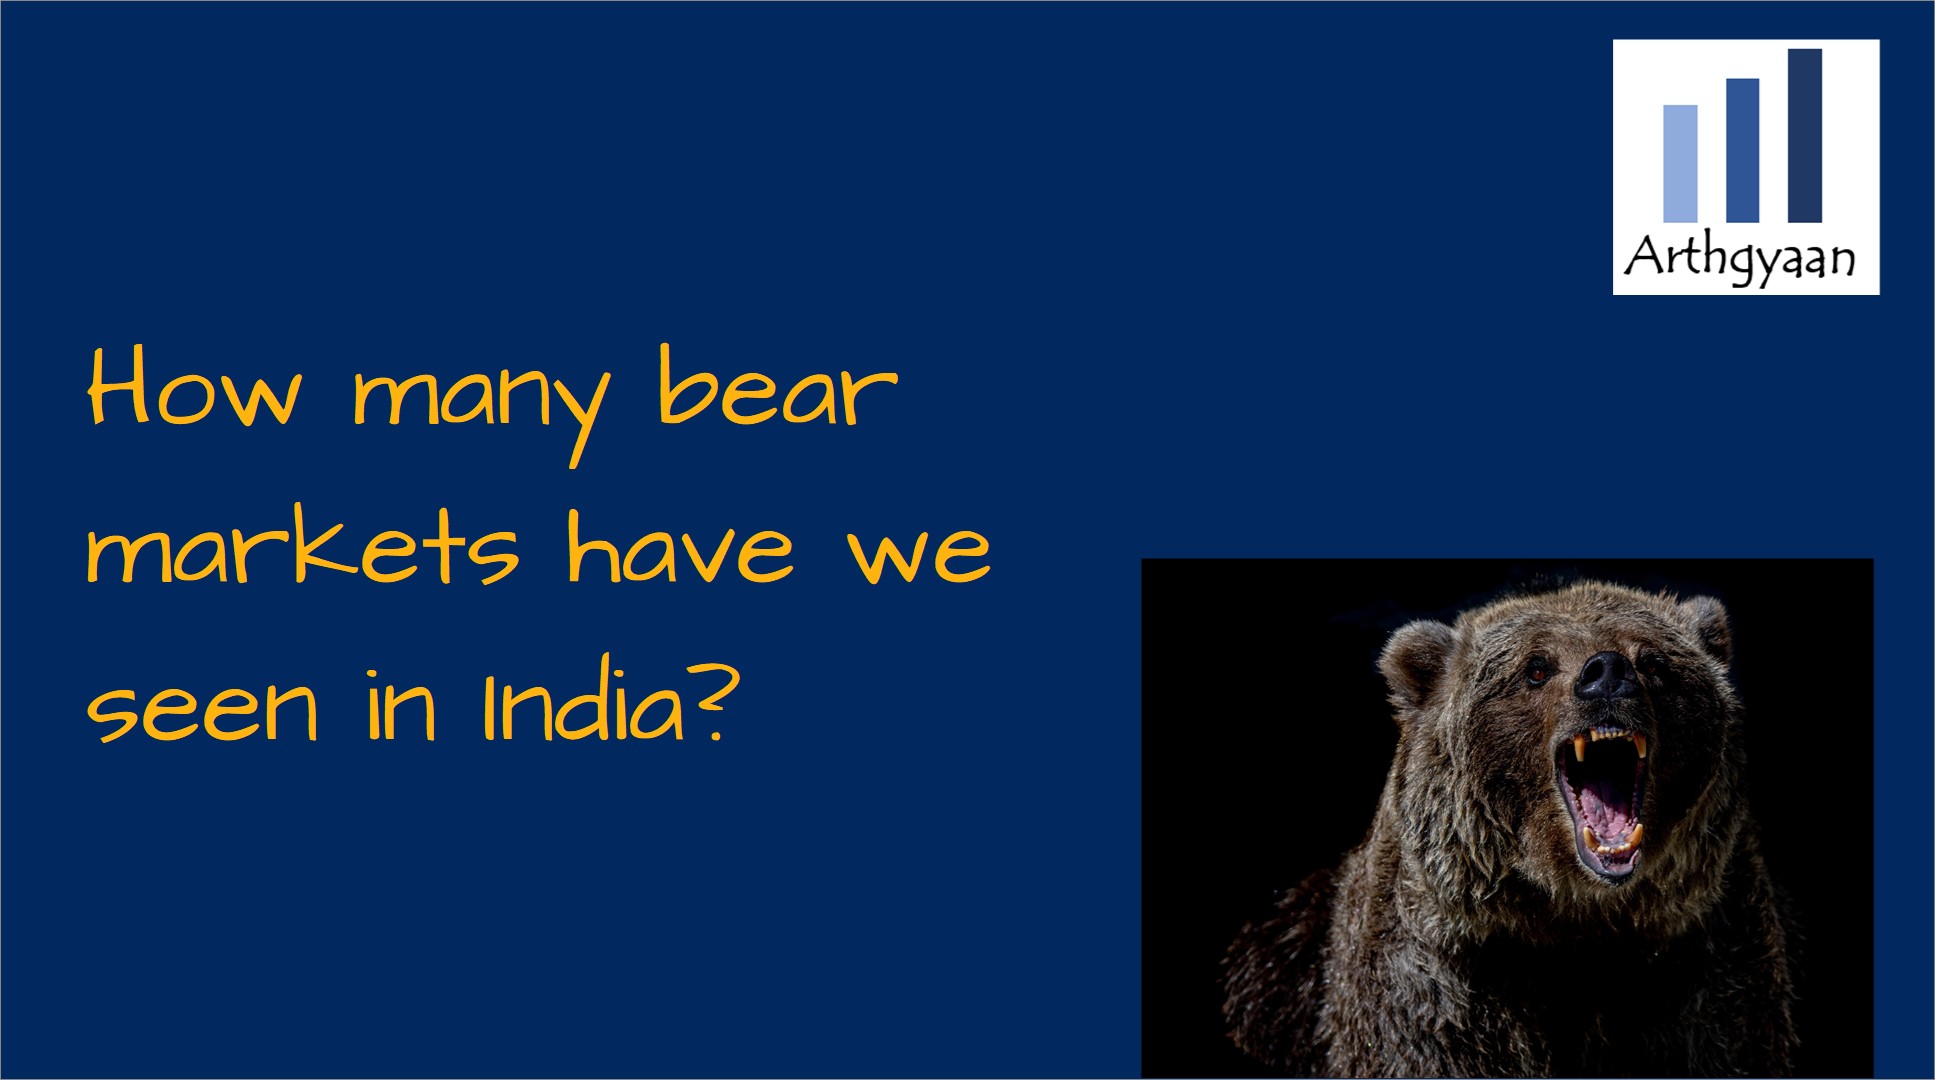 <p>This article gives you a brief history of bear markets in India, where the stock market has fallen by 20% or more and has taken some time to recover.</p>

